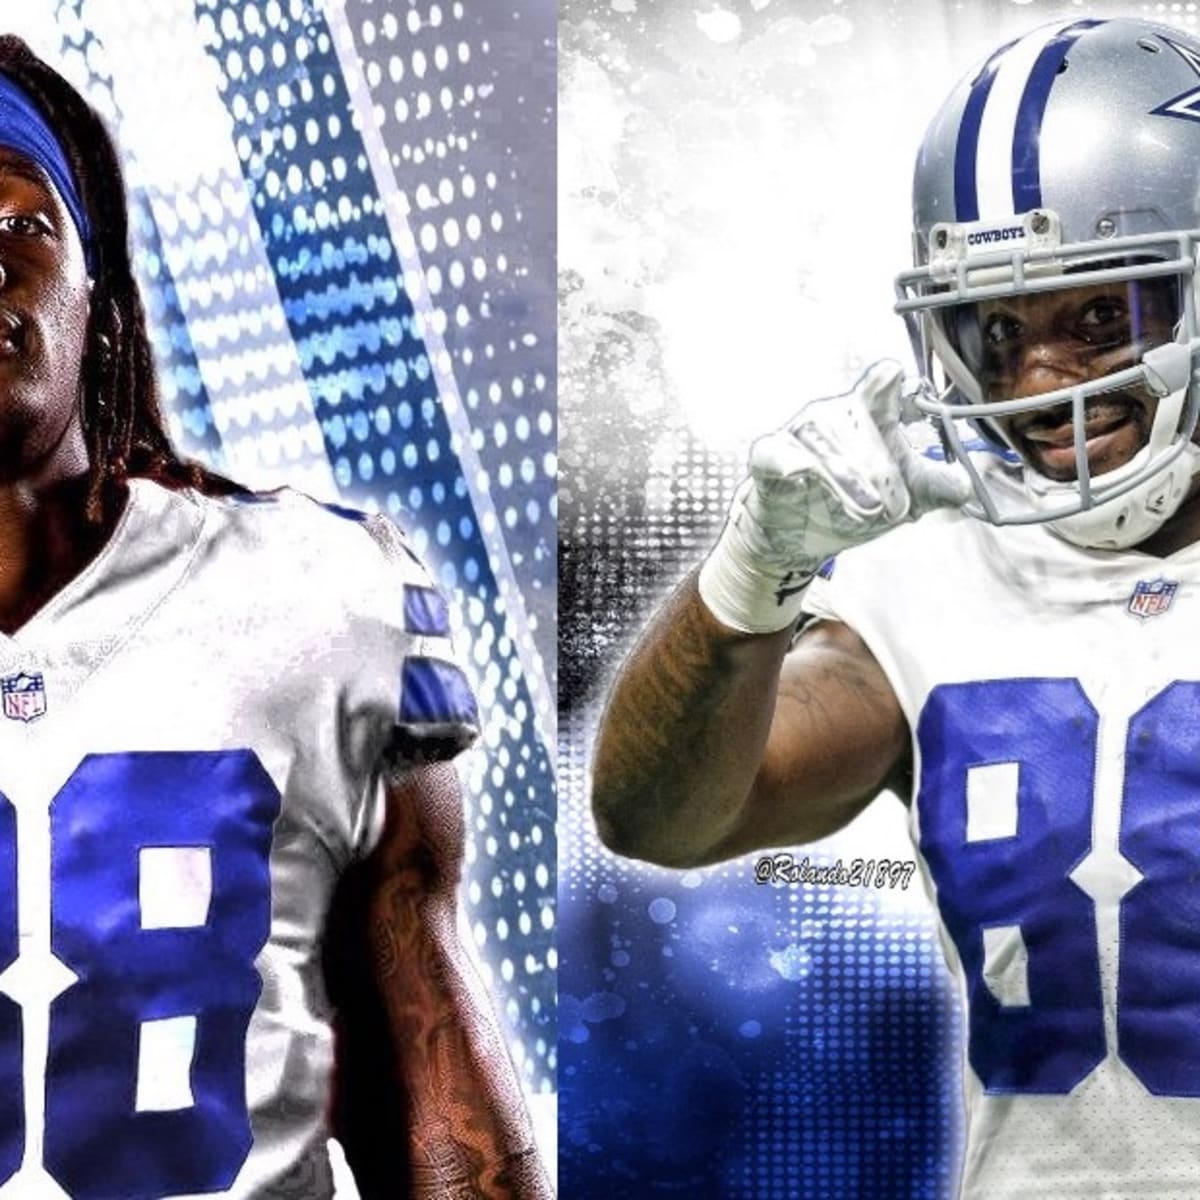 Dez Bryant to wear famed No. 88 for Dallas Cowboys